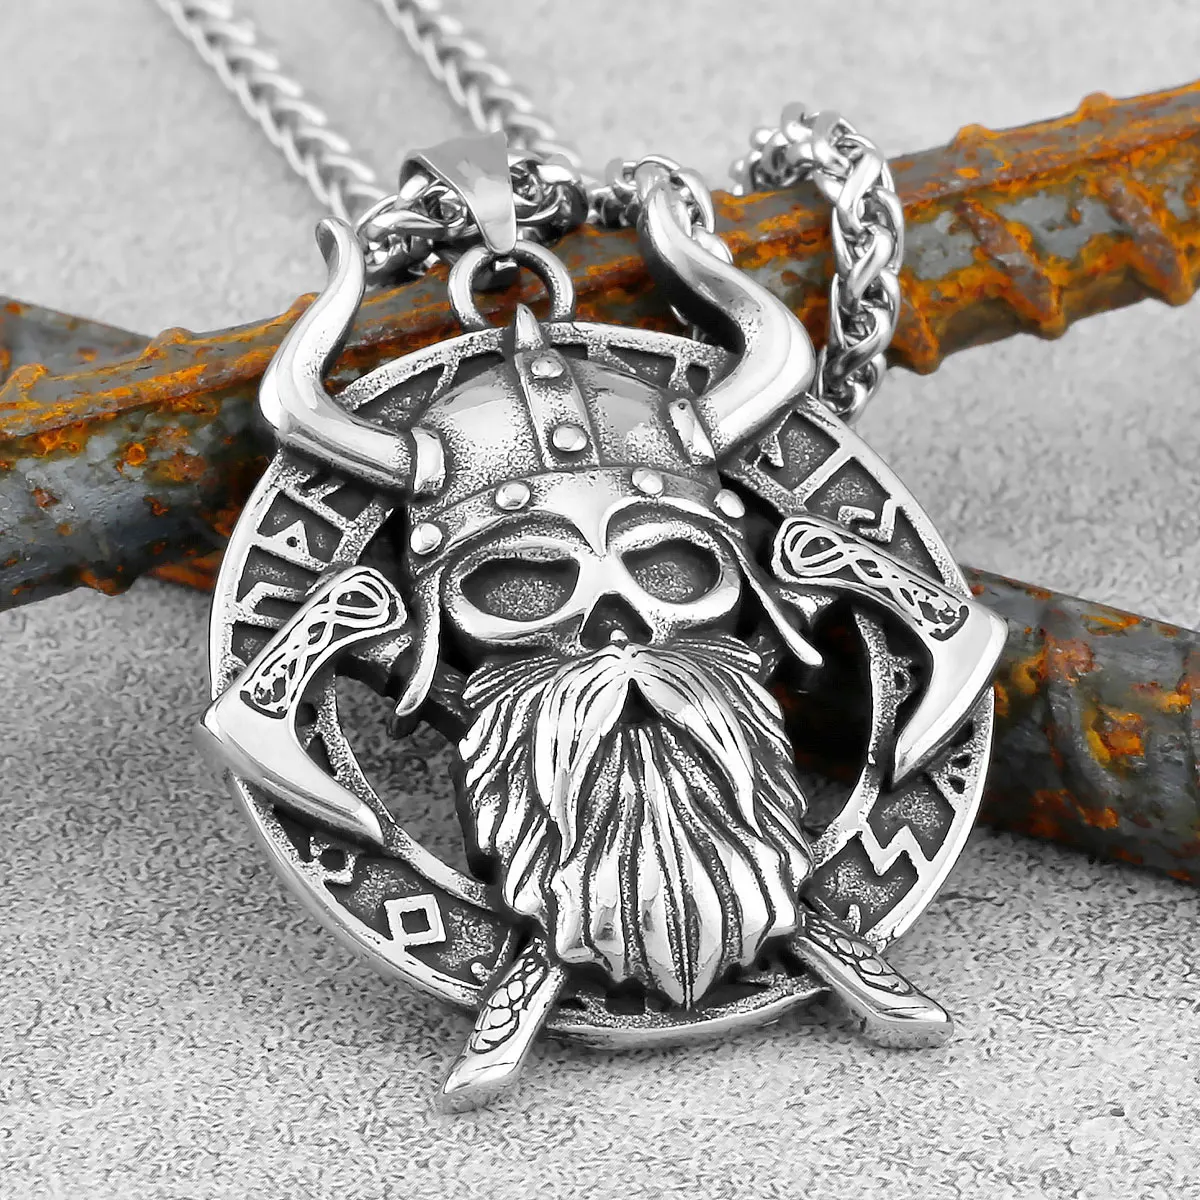 

Viking Warrior Axe Pendant Stainless Steel Nordic Double Axe Rune Amulet Necklace For Men Jewelry Gifts Dropshipping Wholesale